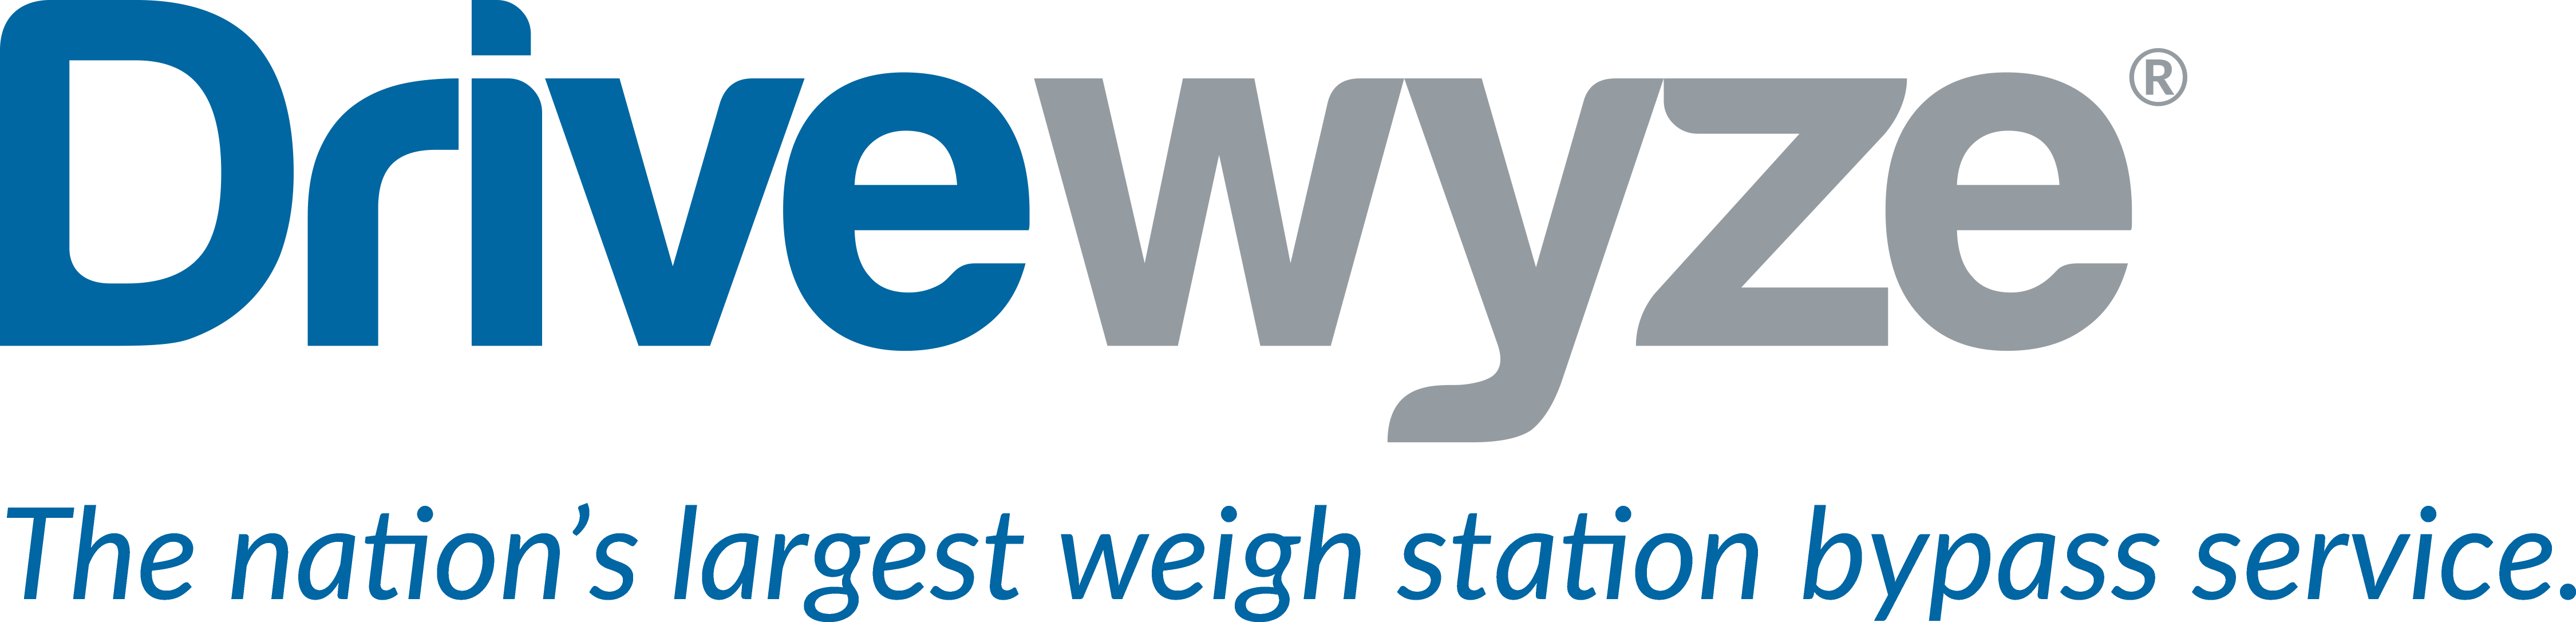 Drivewyze Weigh Station Bypass